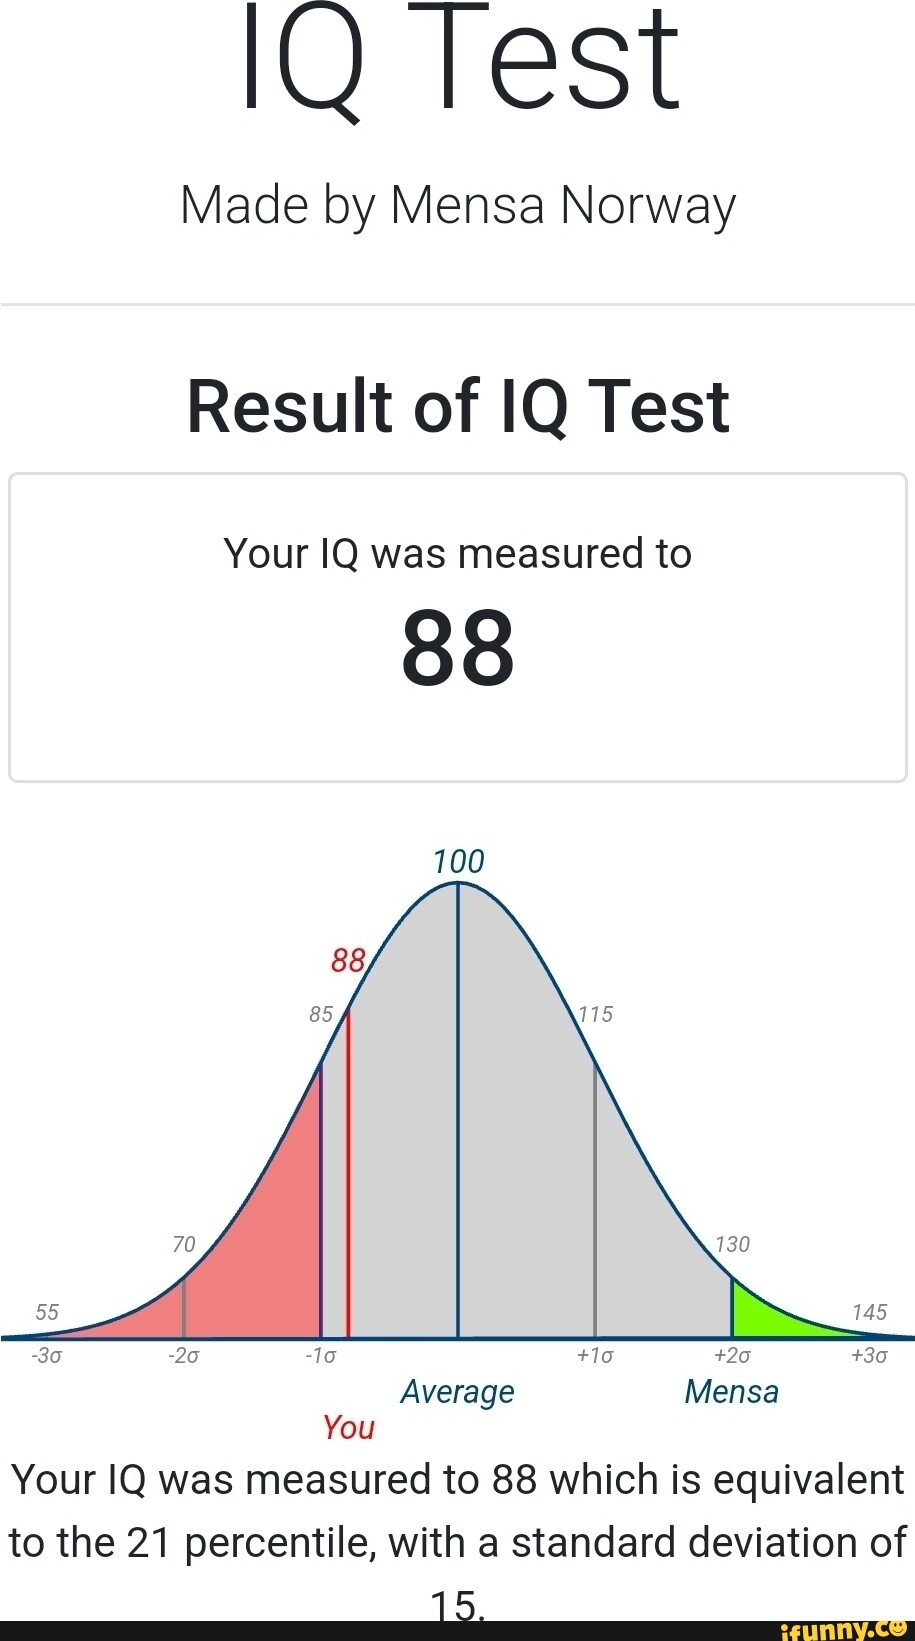 IQ Test Made by Mensa Norway Result of IQ Test Your IQ was measured to